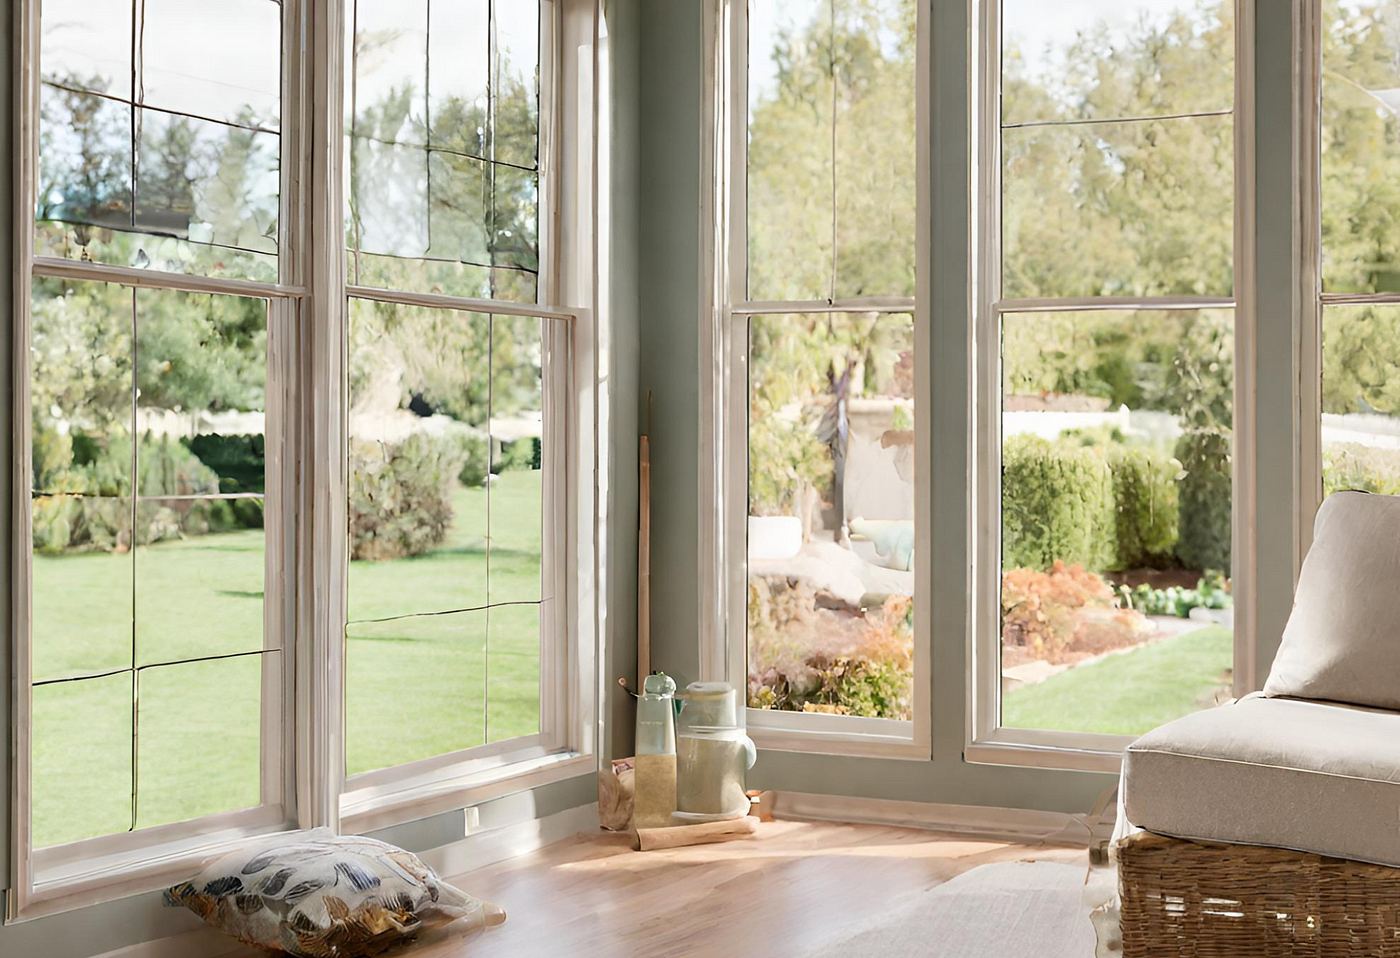 Find Affordable and Customizable Milgard Windows Online | by Benjamin Green  | Medium